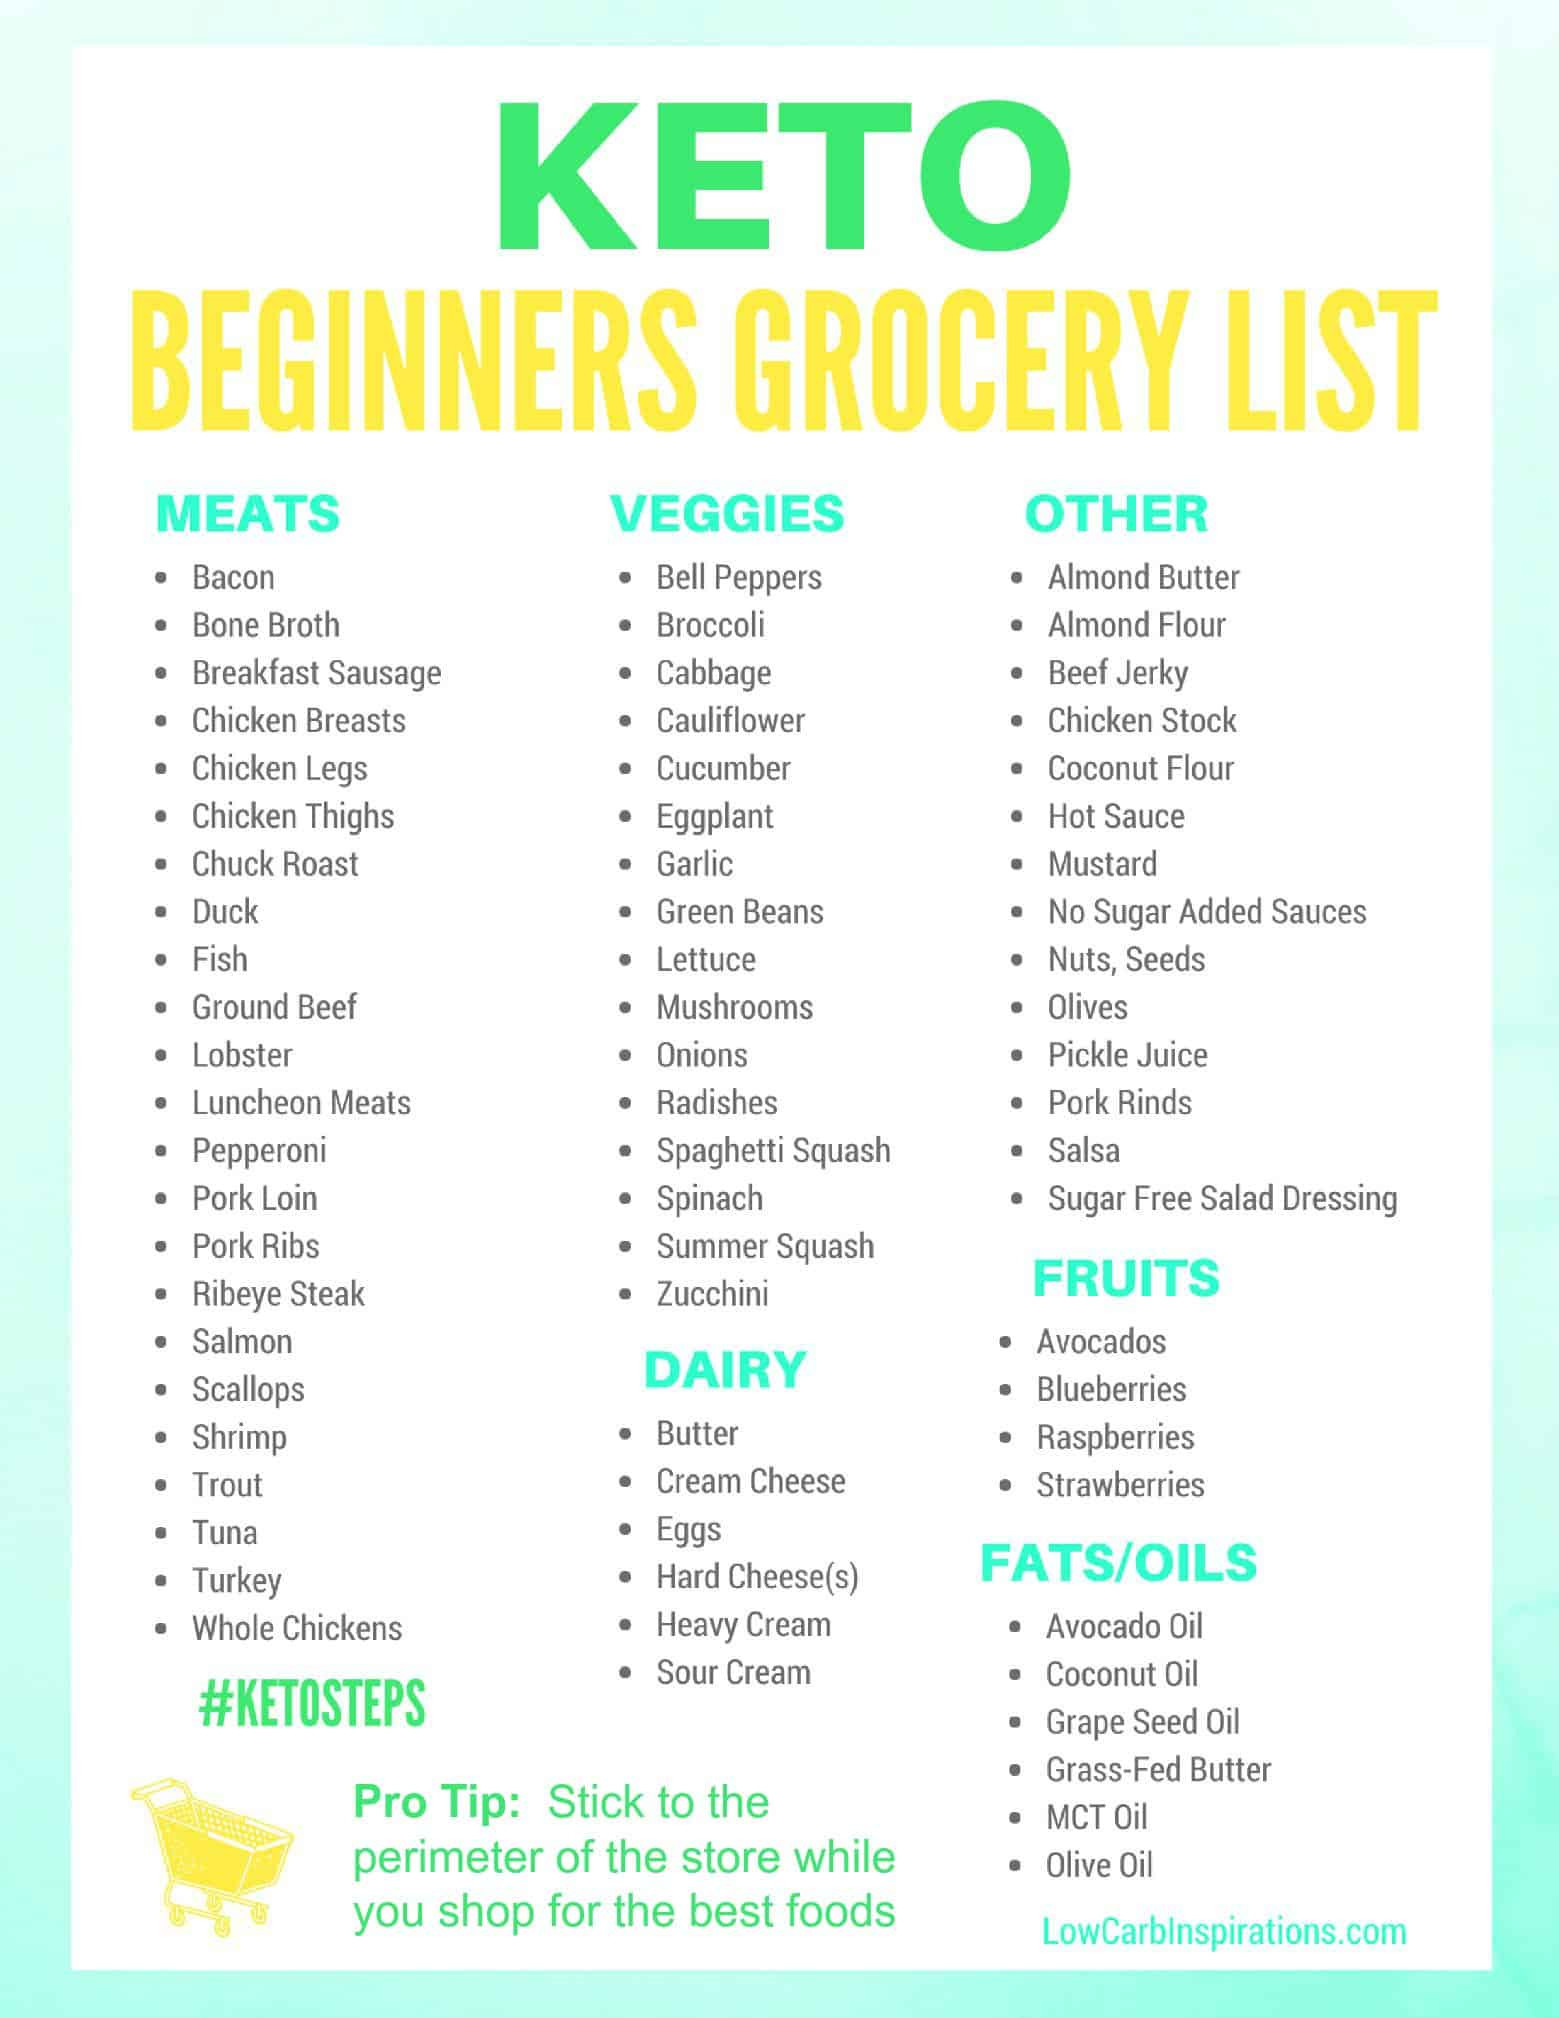 Keto Diet For Beginners Meal Plan With Grocery List
 Keto Grocery List for Beginners iSaveA2Z